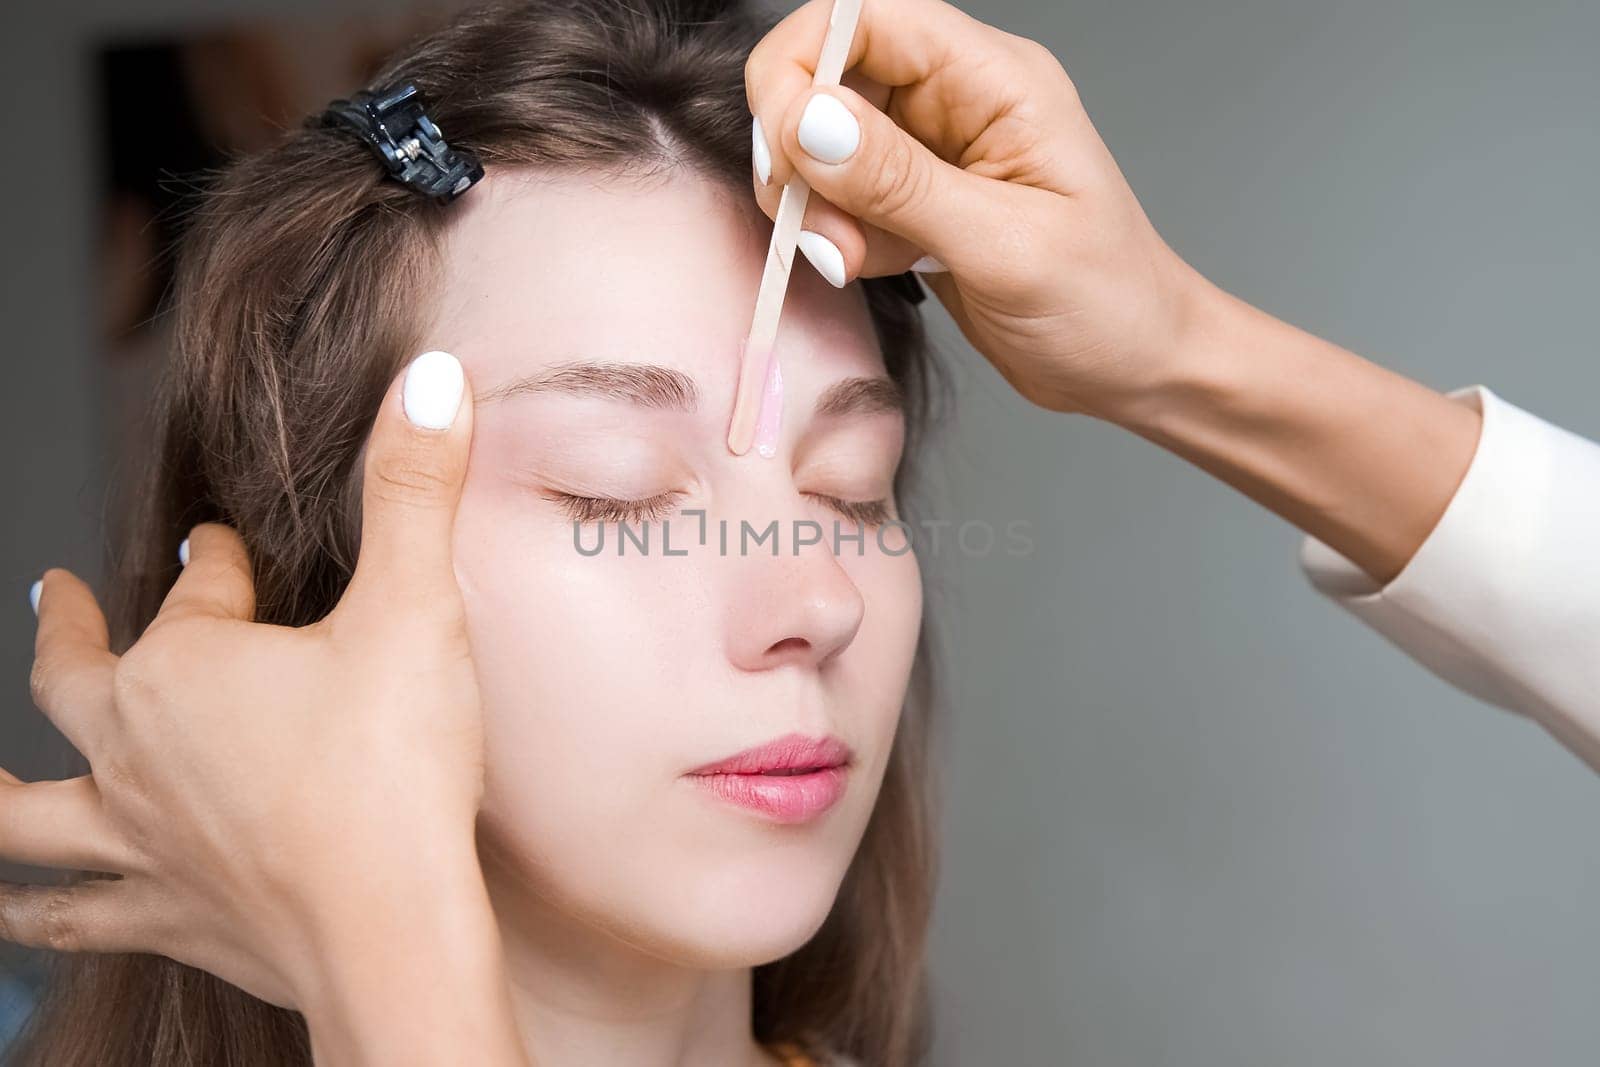 A cosmetologist removes hair from a beautiful woman's face with hot wax. A woman undergoes a cosmetic procedure. Epilation removing hair from the face, skin care and health concepts. by yanik88